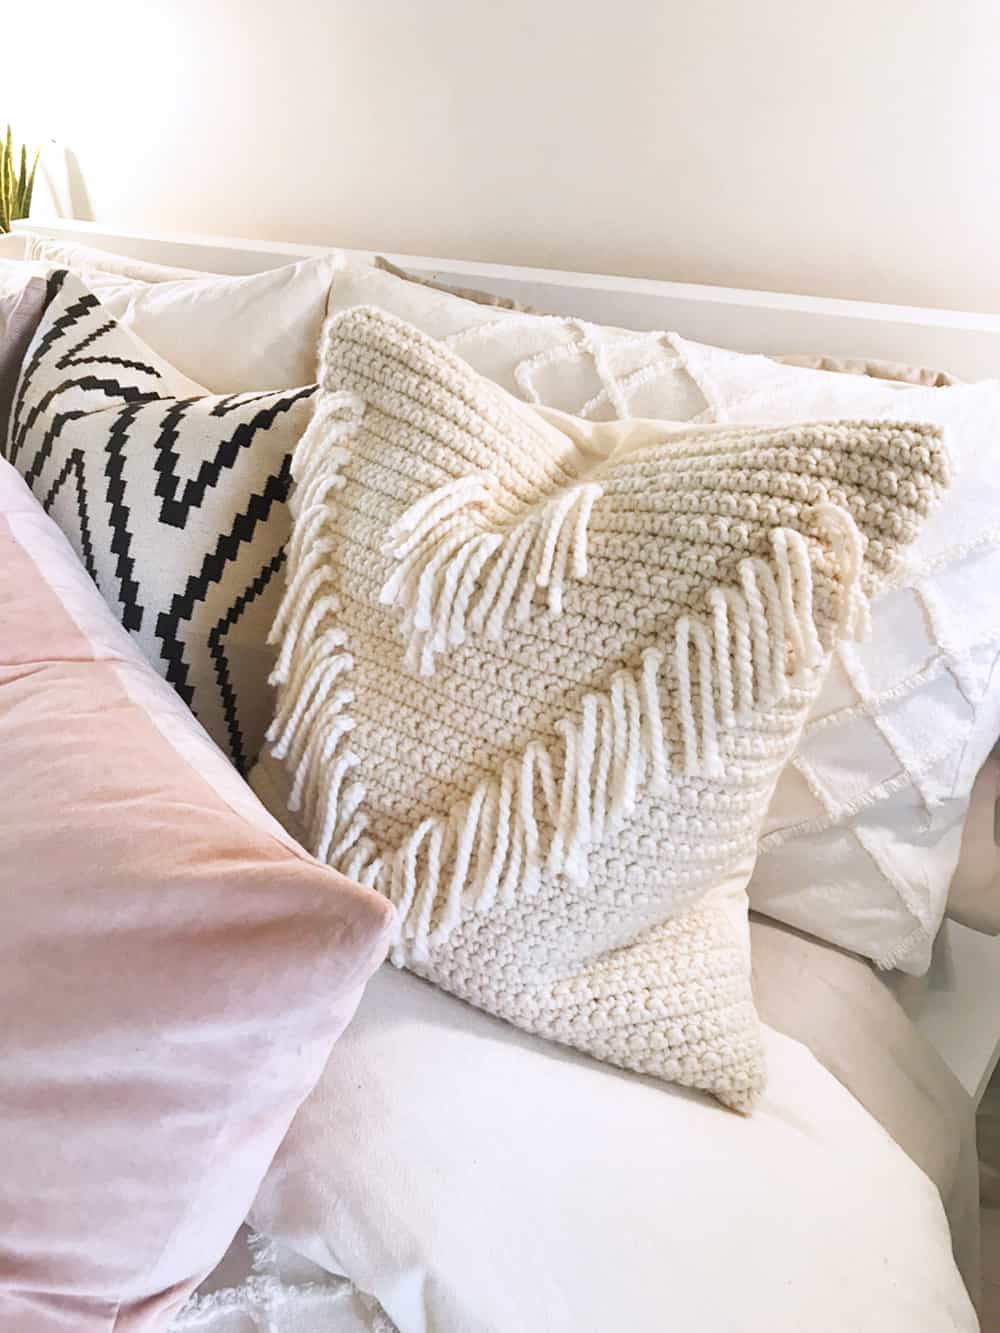 diy crochet pillow with fringes